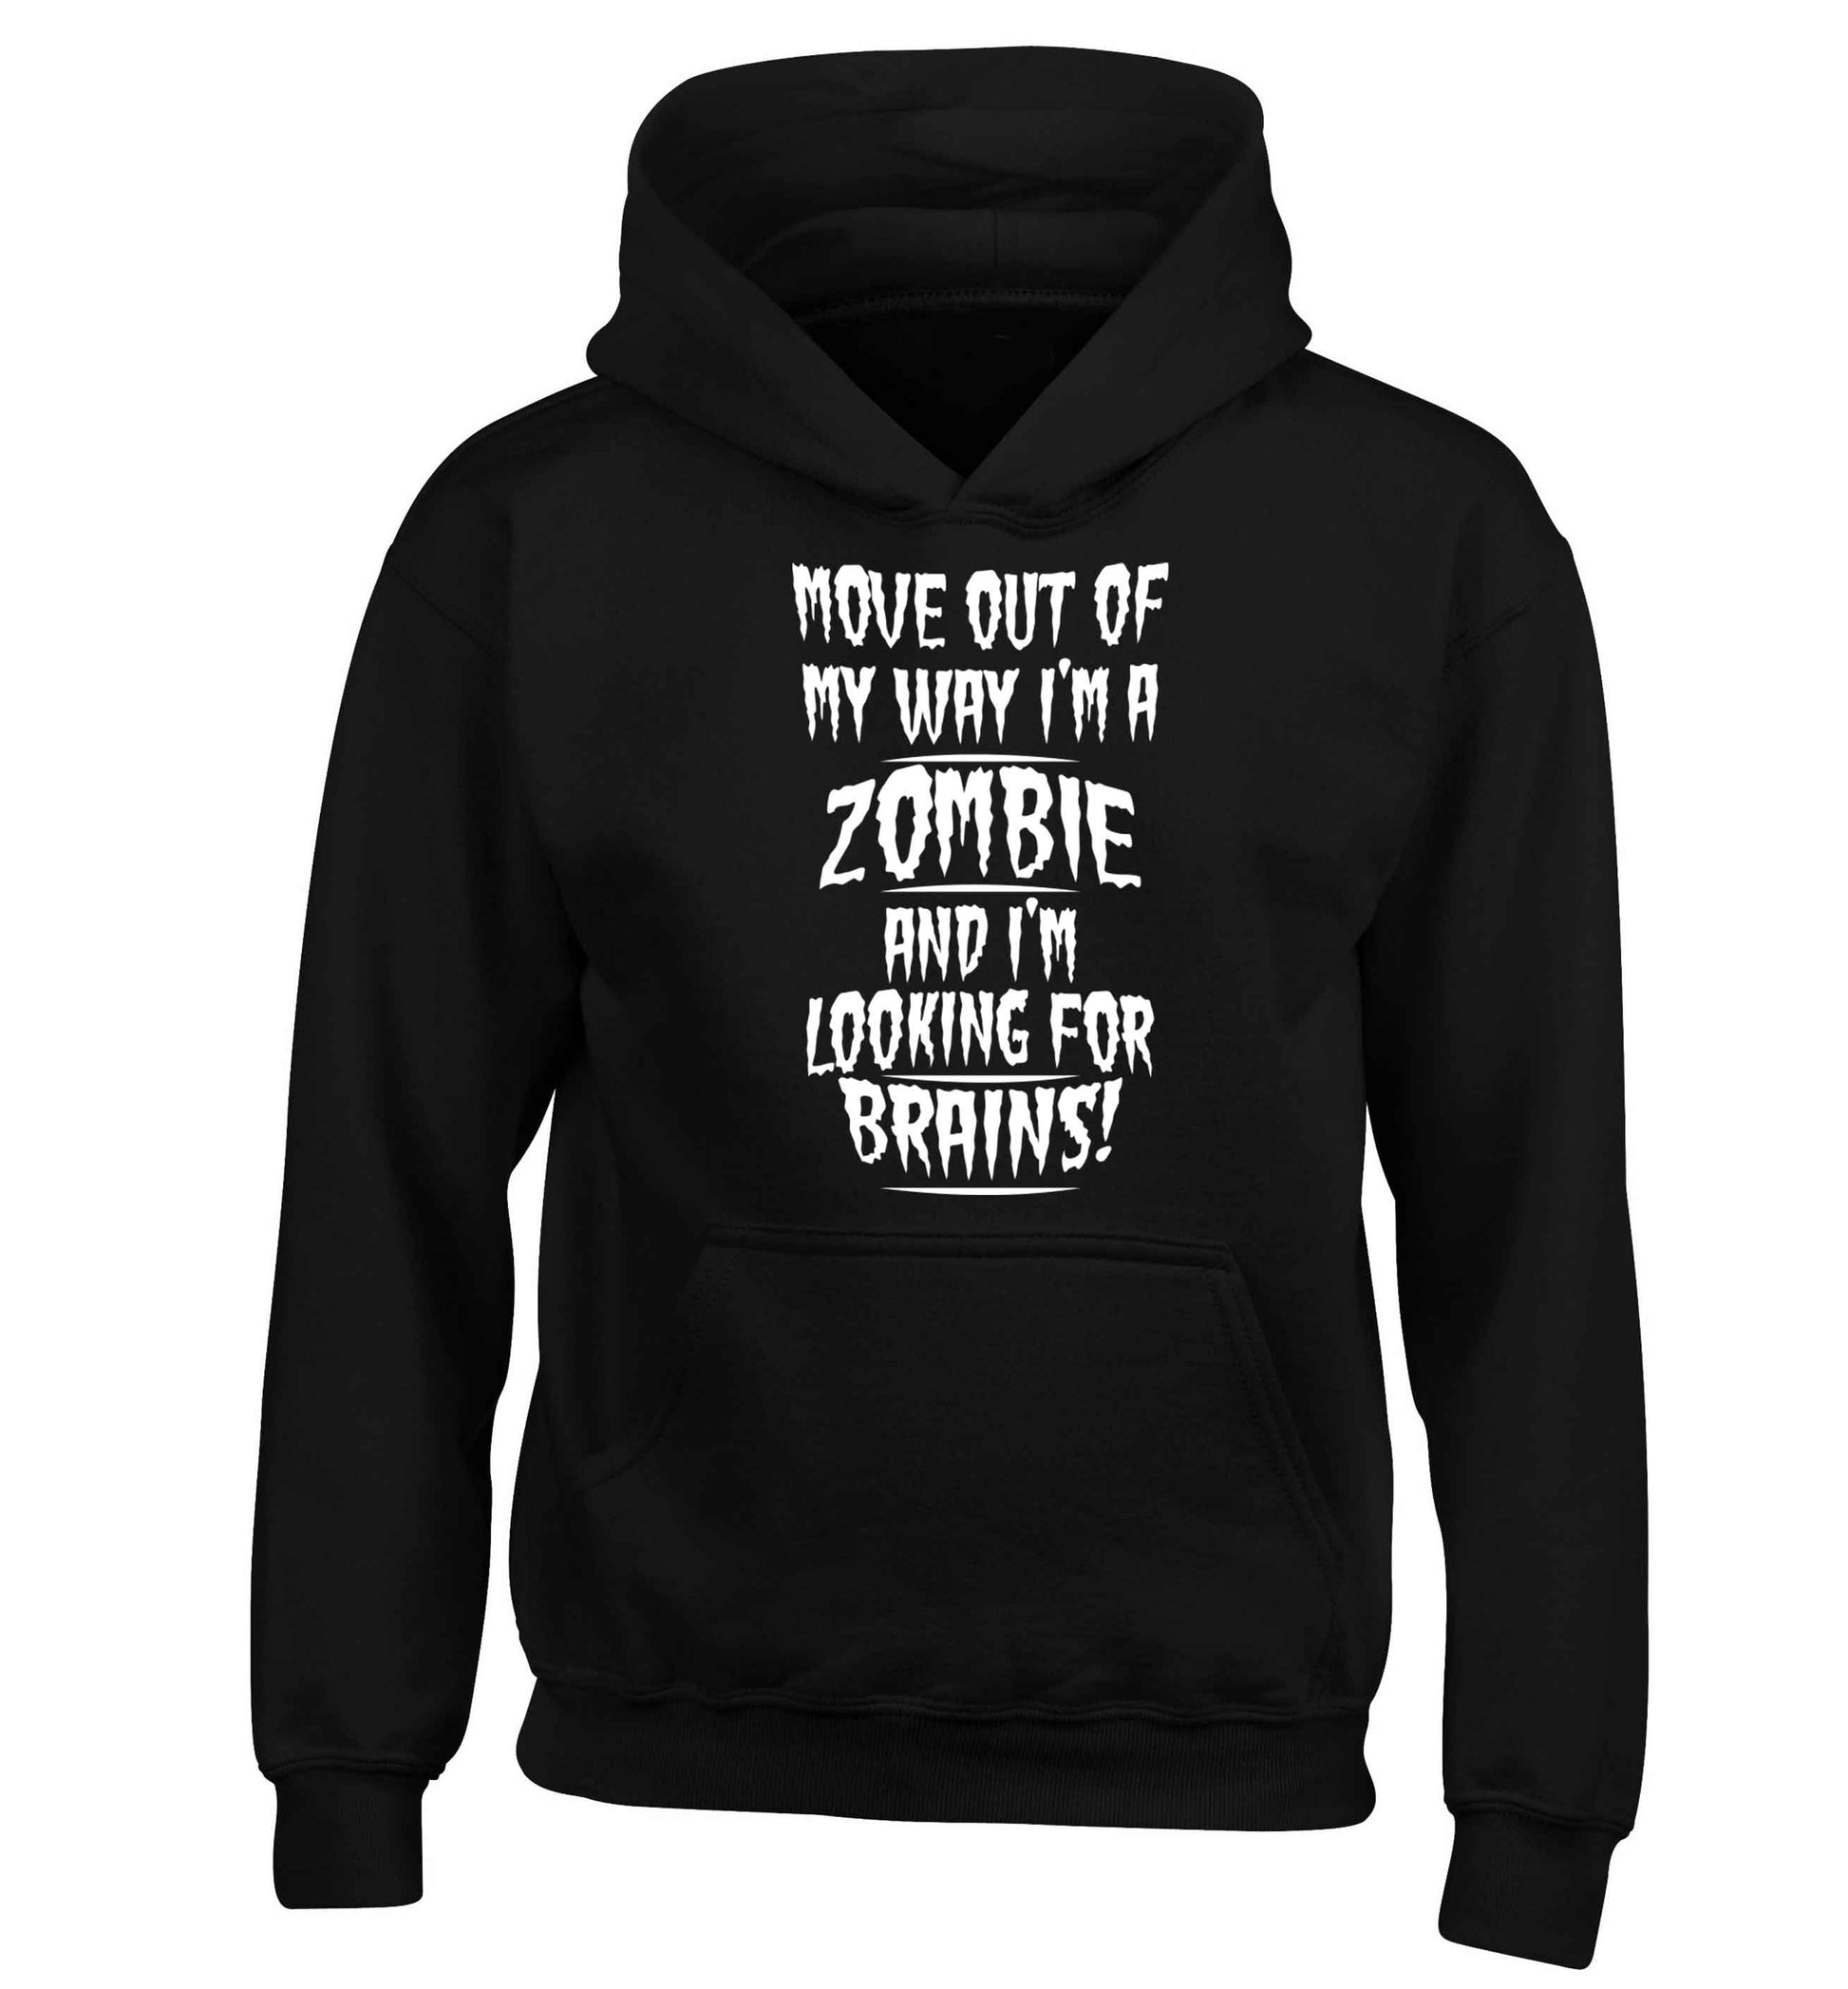 I'm a zombie and I'm looking for brains! children's black hoodie 12-13 Years